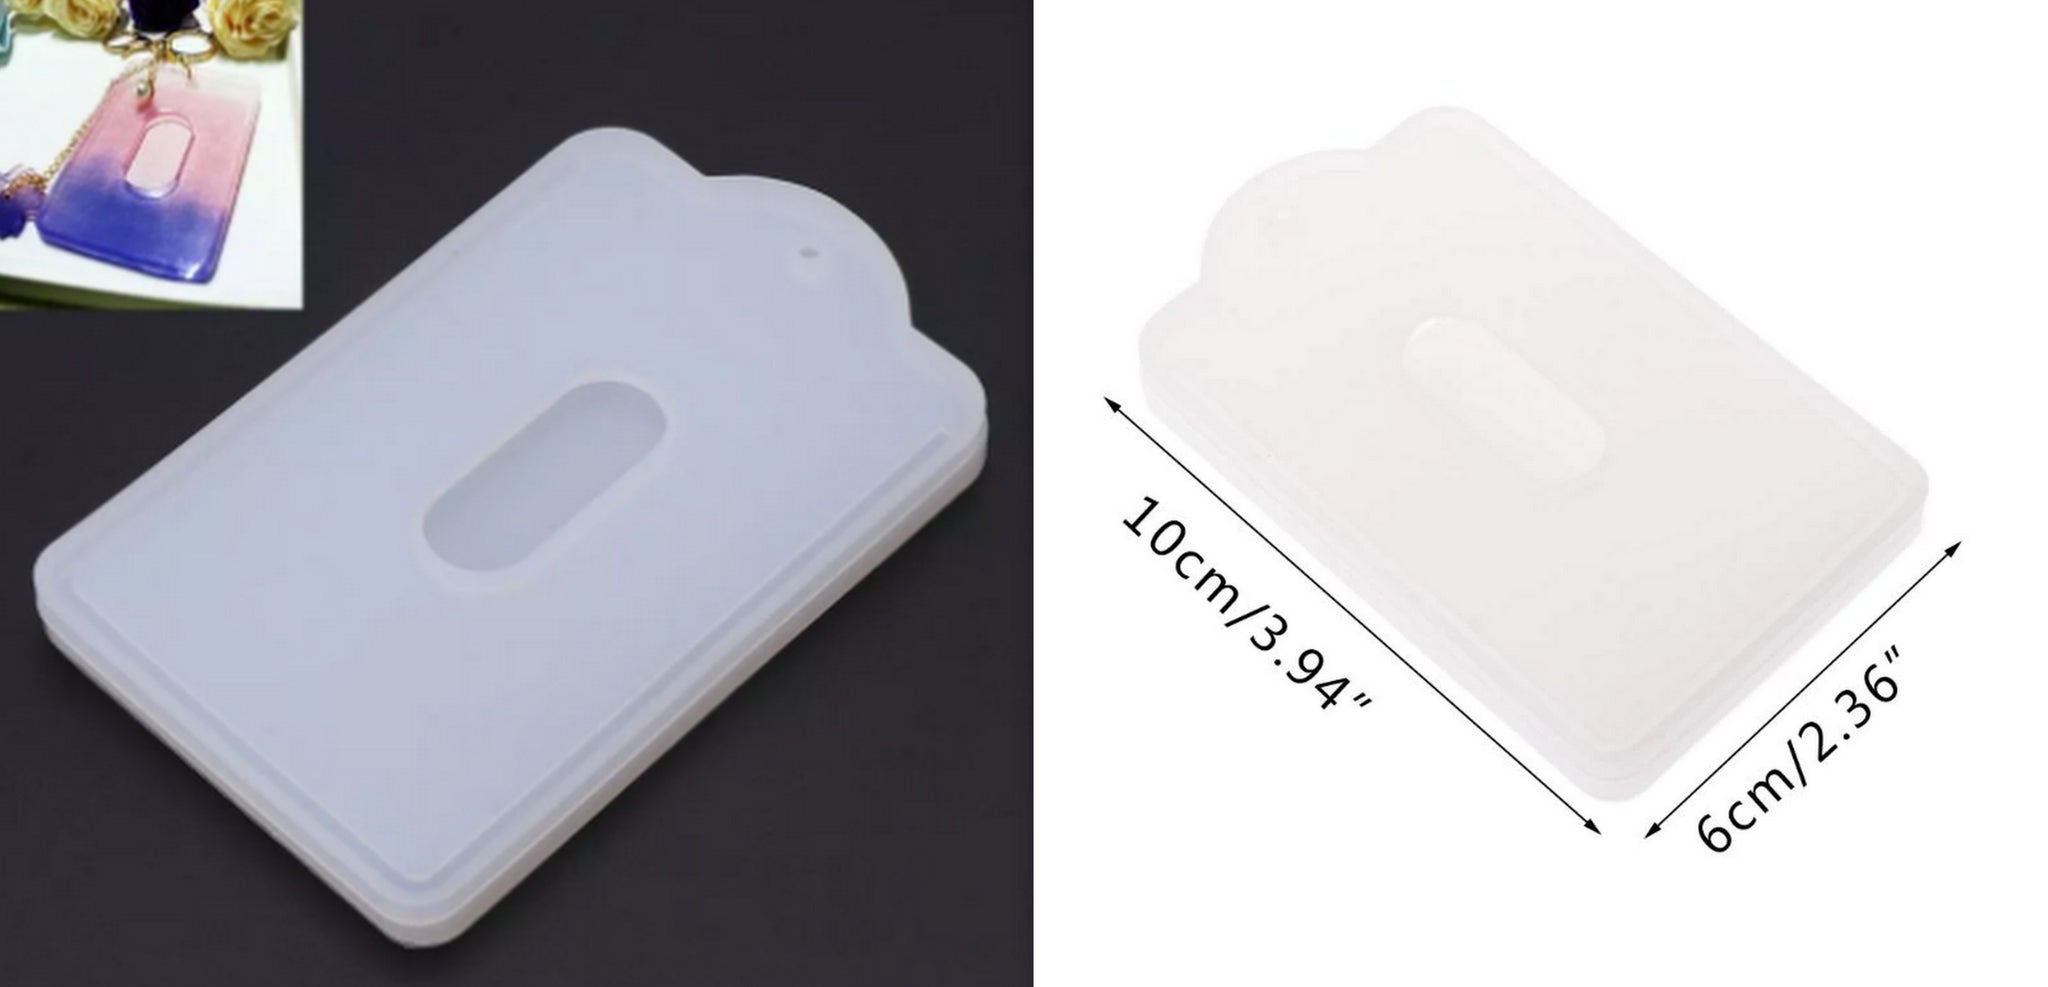 Card Pocket ID Holder Silicone Mold For Making Resin Jewellery